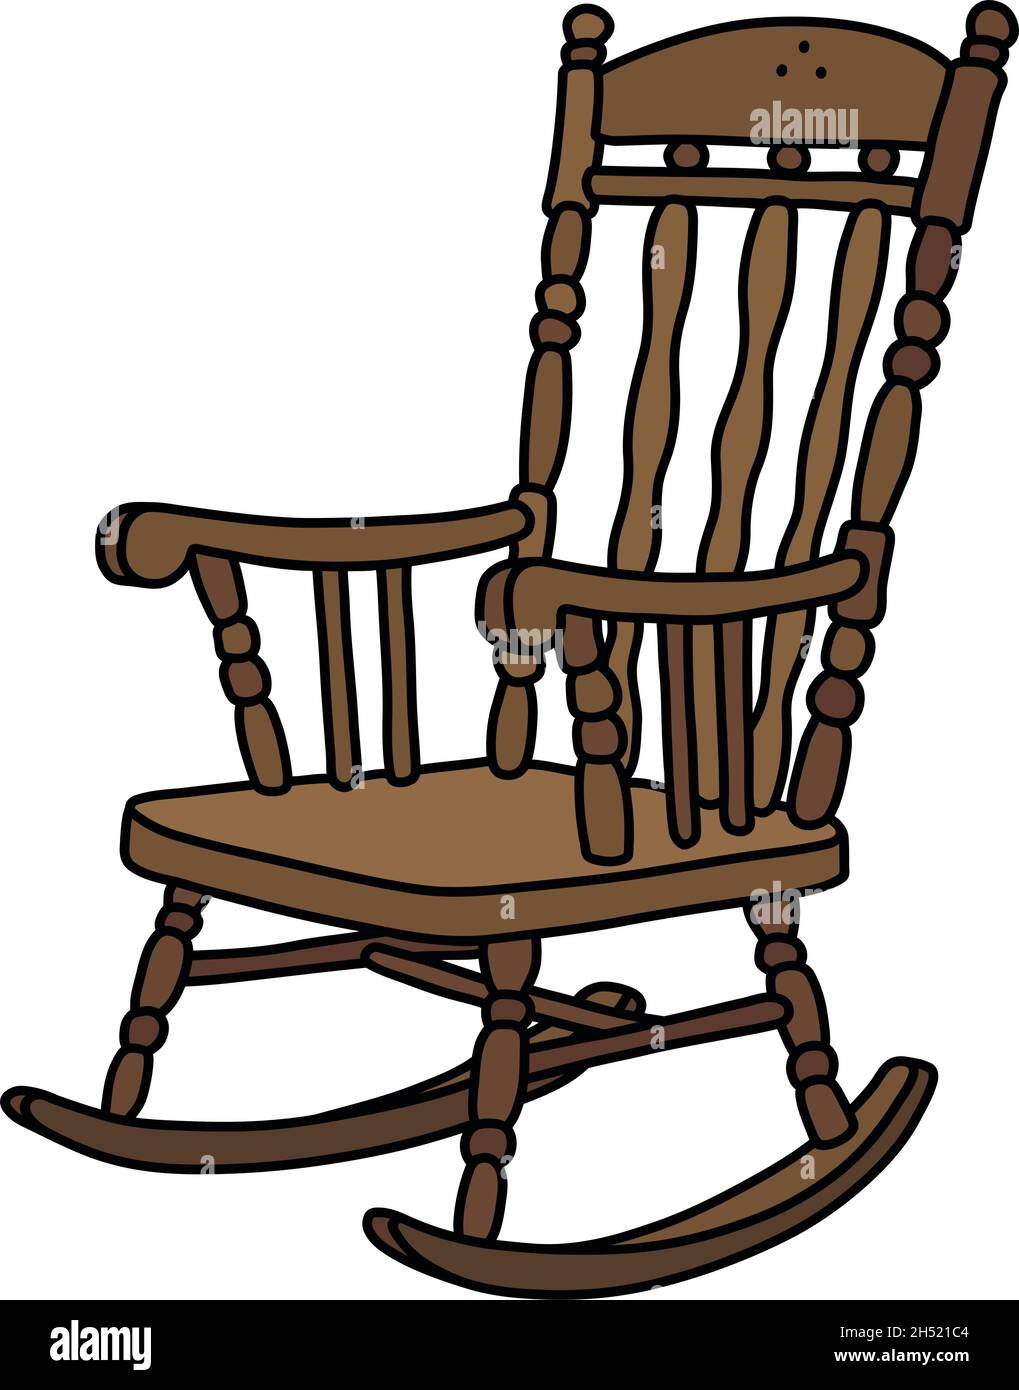 Chair Clip Art Vintage Rocking Chair Illustration Commercial - Etsy